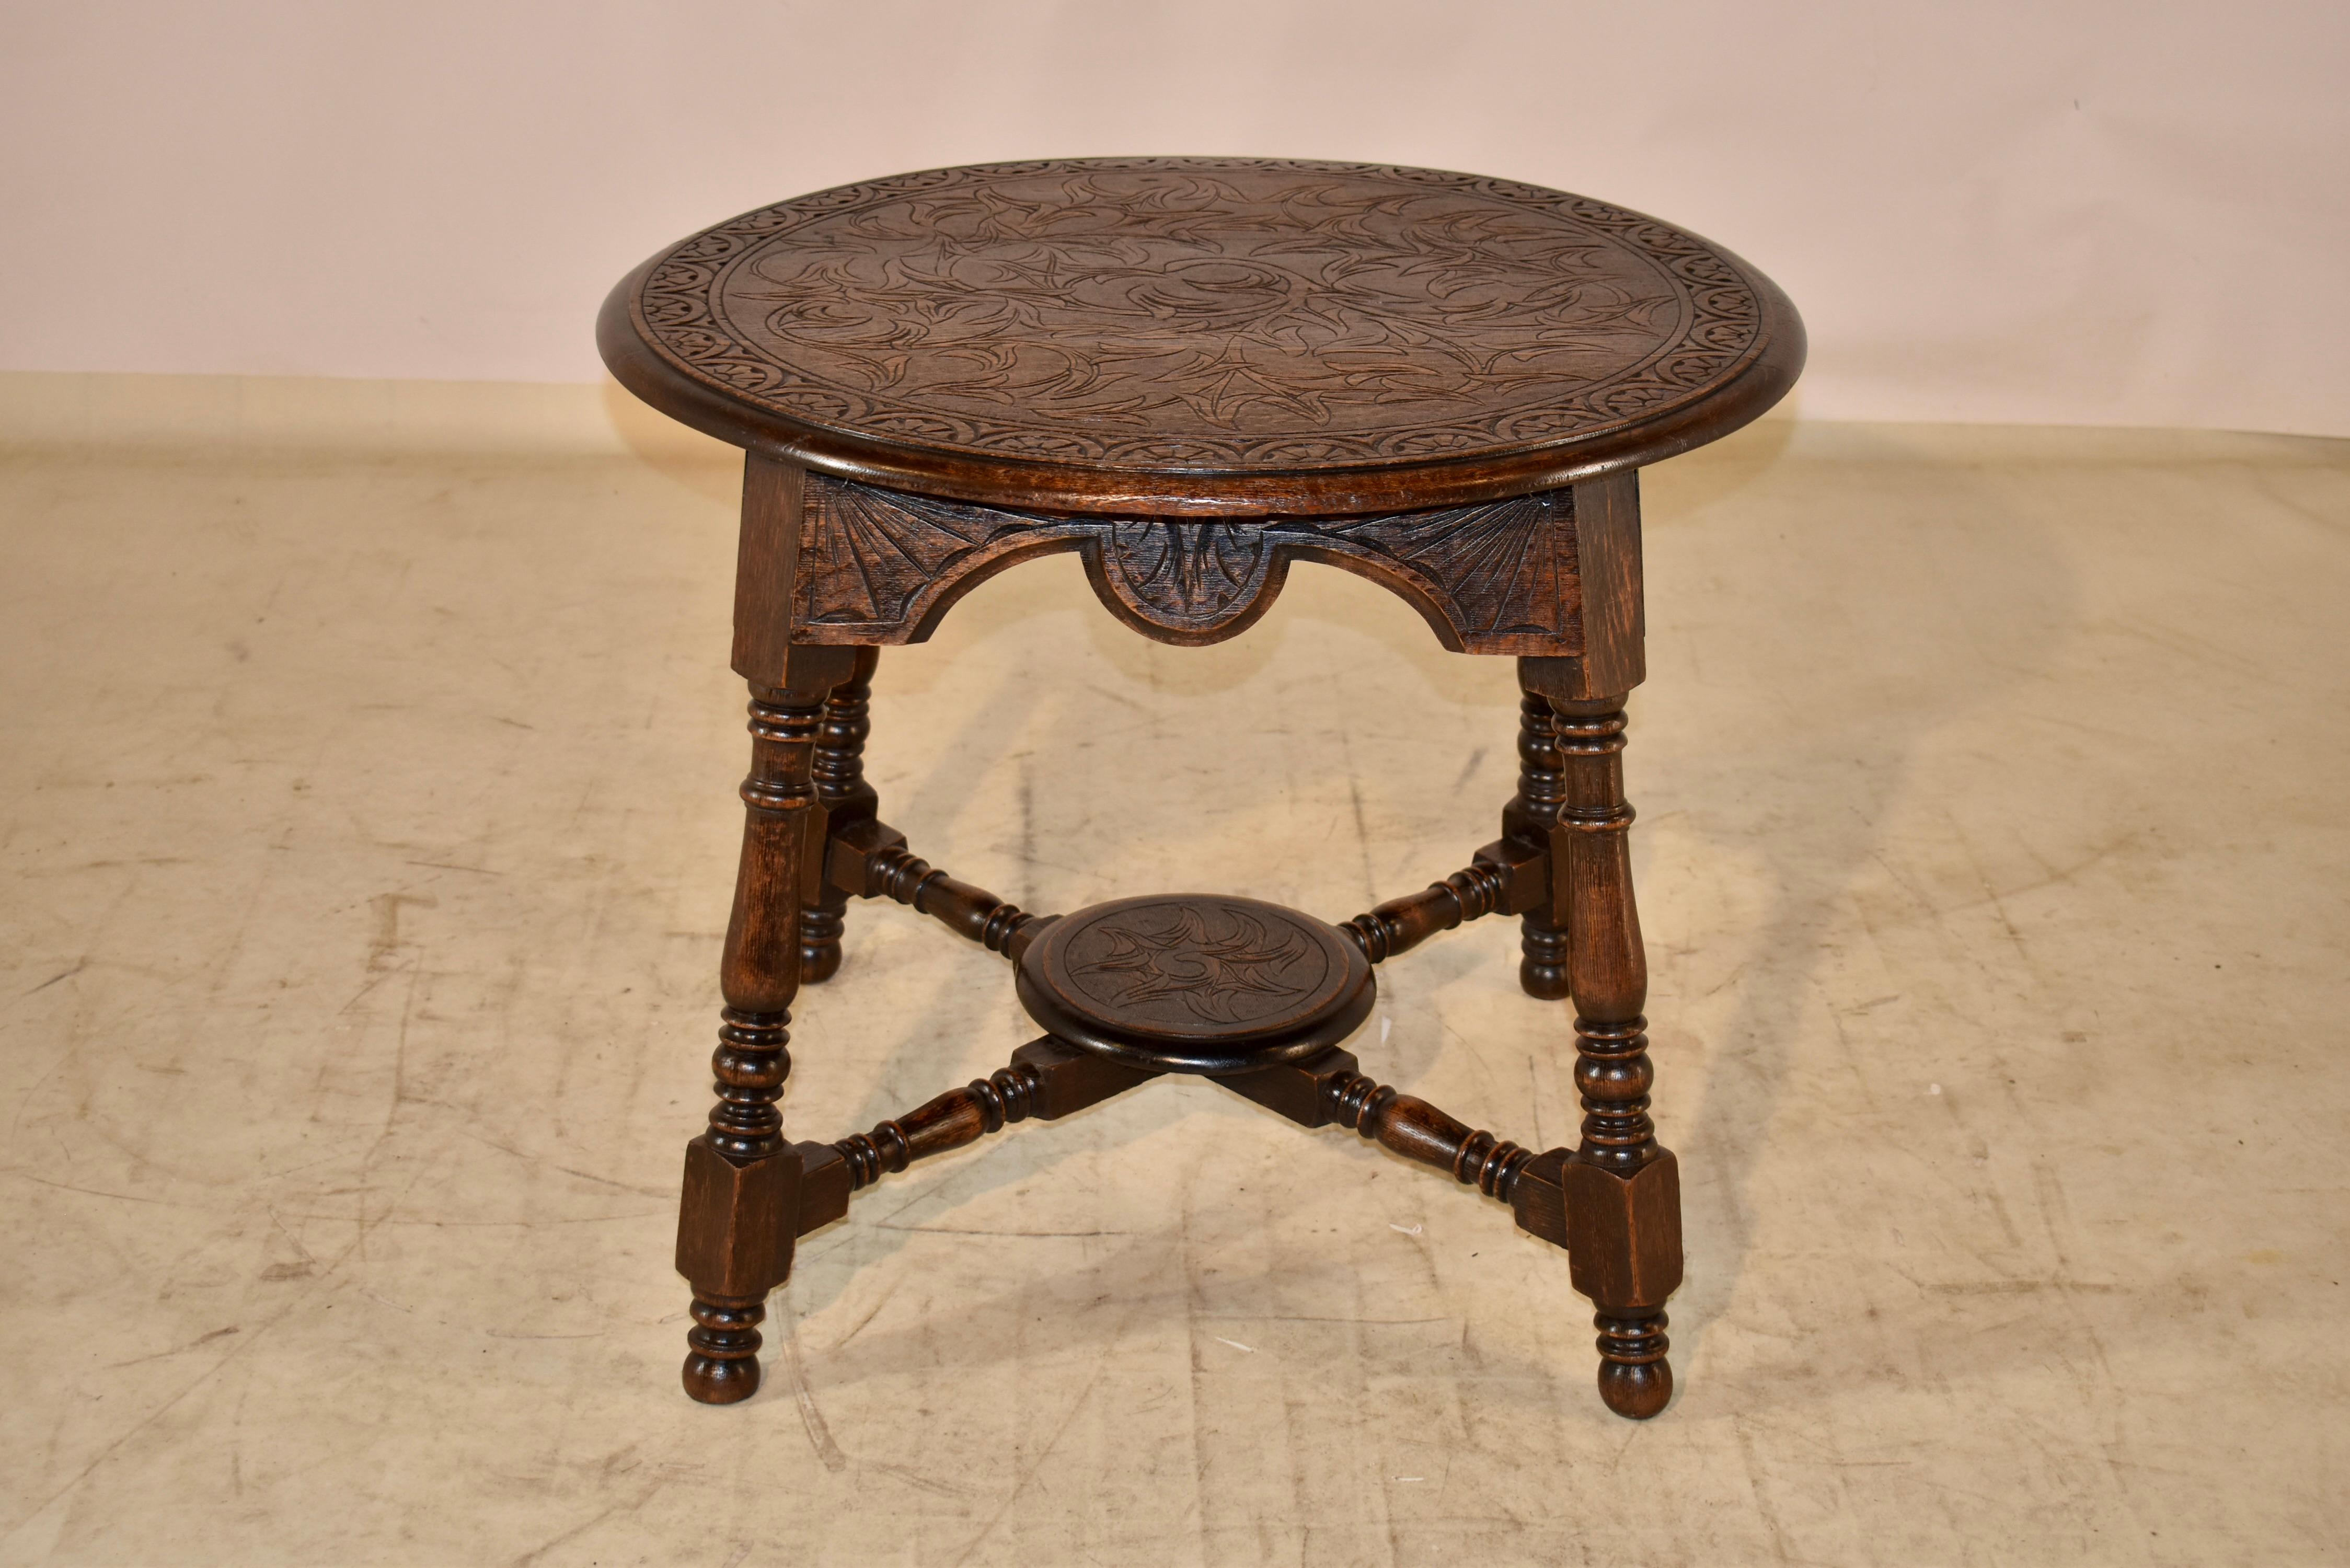 19th century oak round side table from England with a beveled and hand carved decorated banded edge around the top, surrounding hand carved leaf and vine decoration in the center of the top. This follows down to a shaped and carved decorated apron